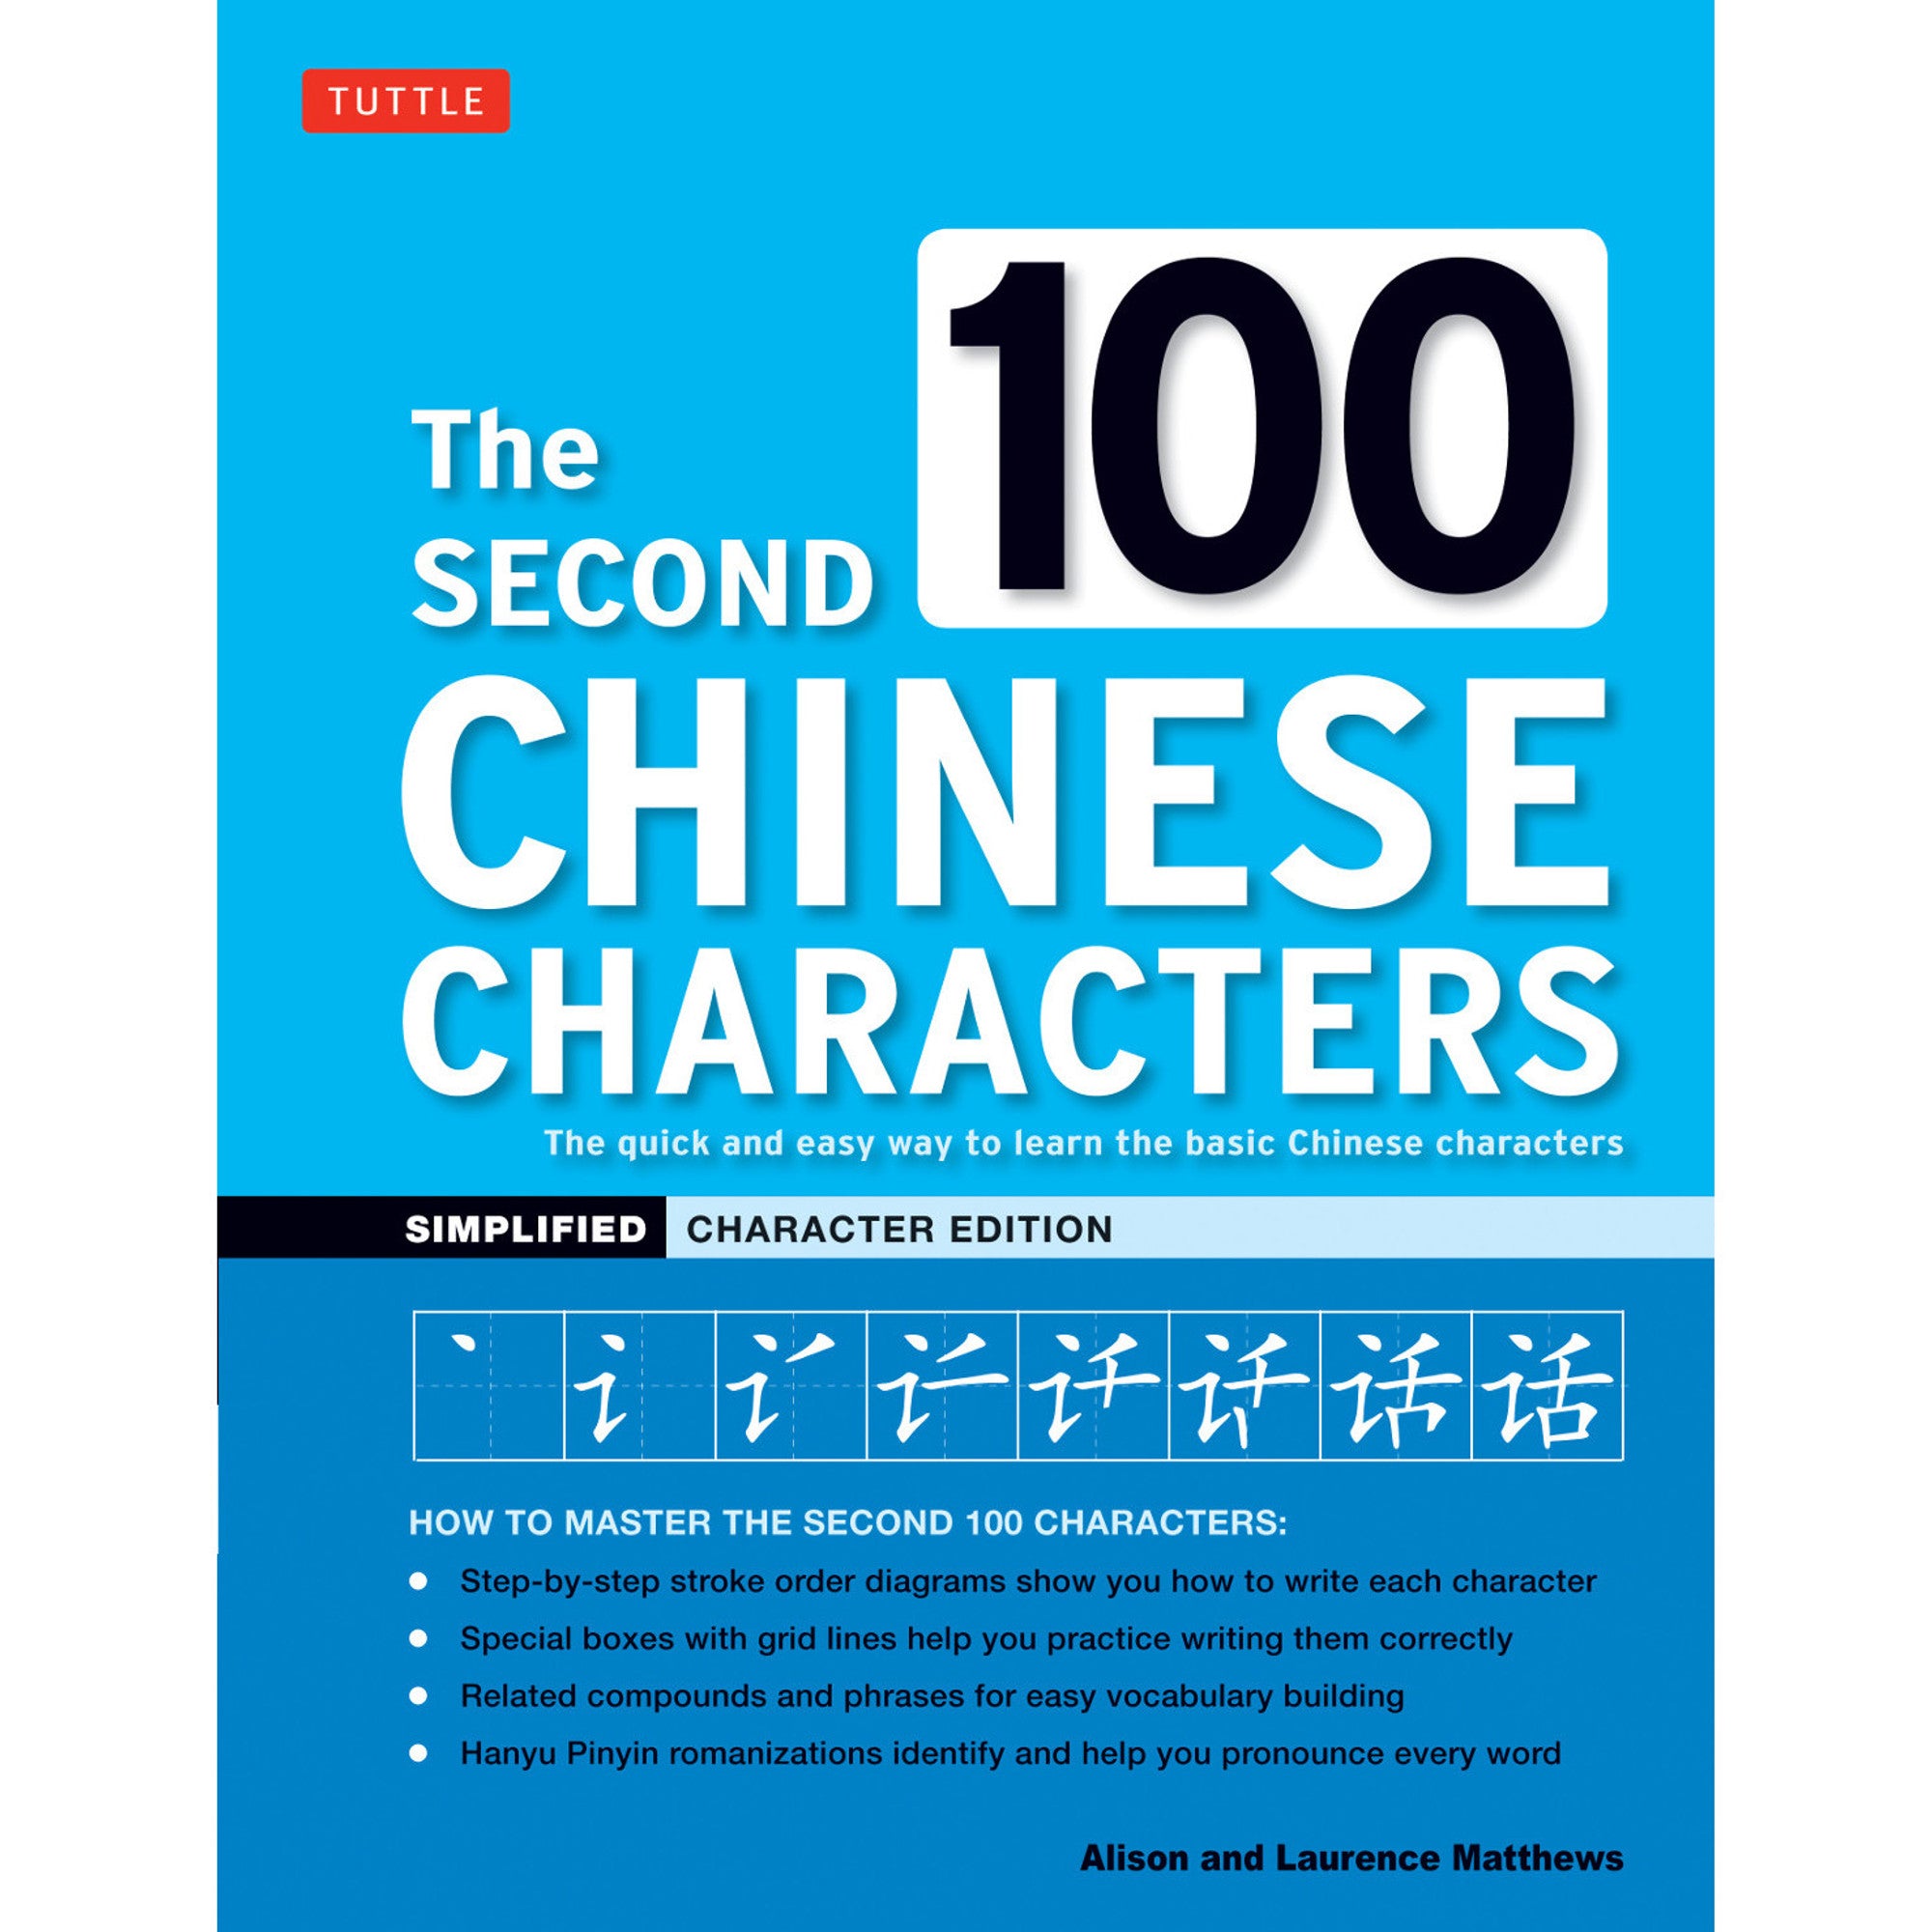 The Second 100 Chinese Characters: Simplified Character Edition: The Quick and Easy - Alison Matthews - 9780804857604 - Tuttle Publishing